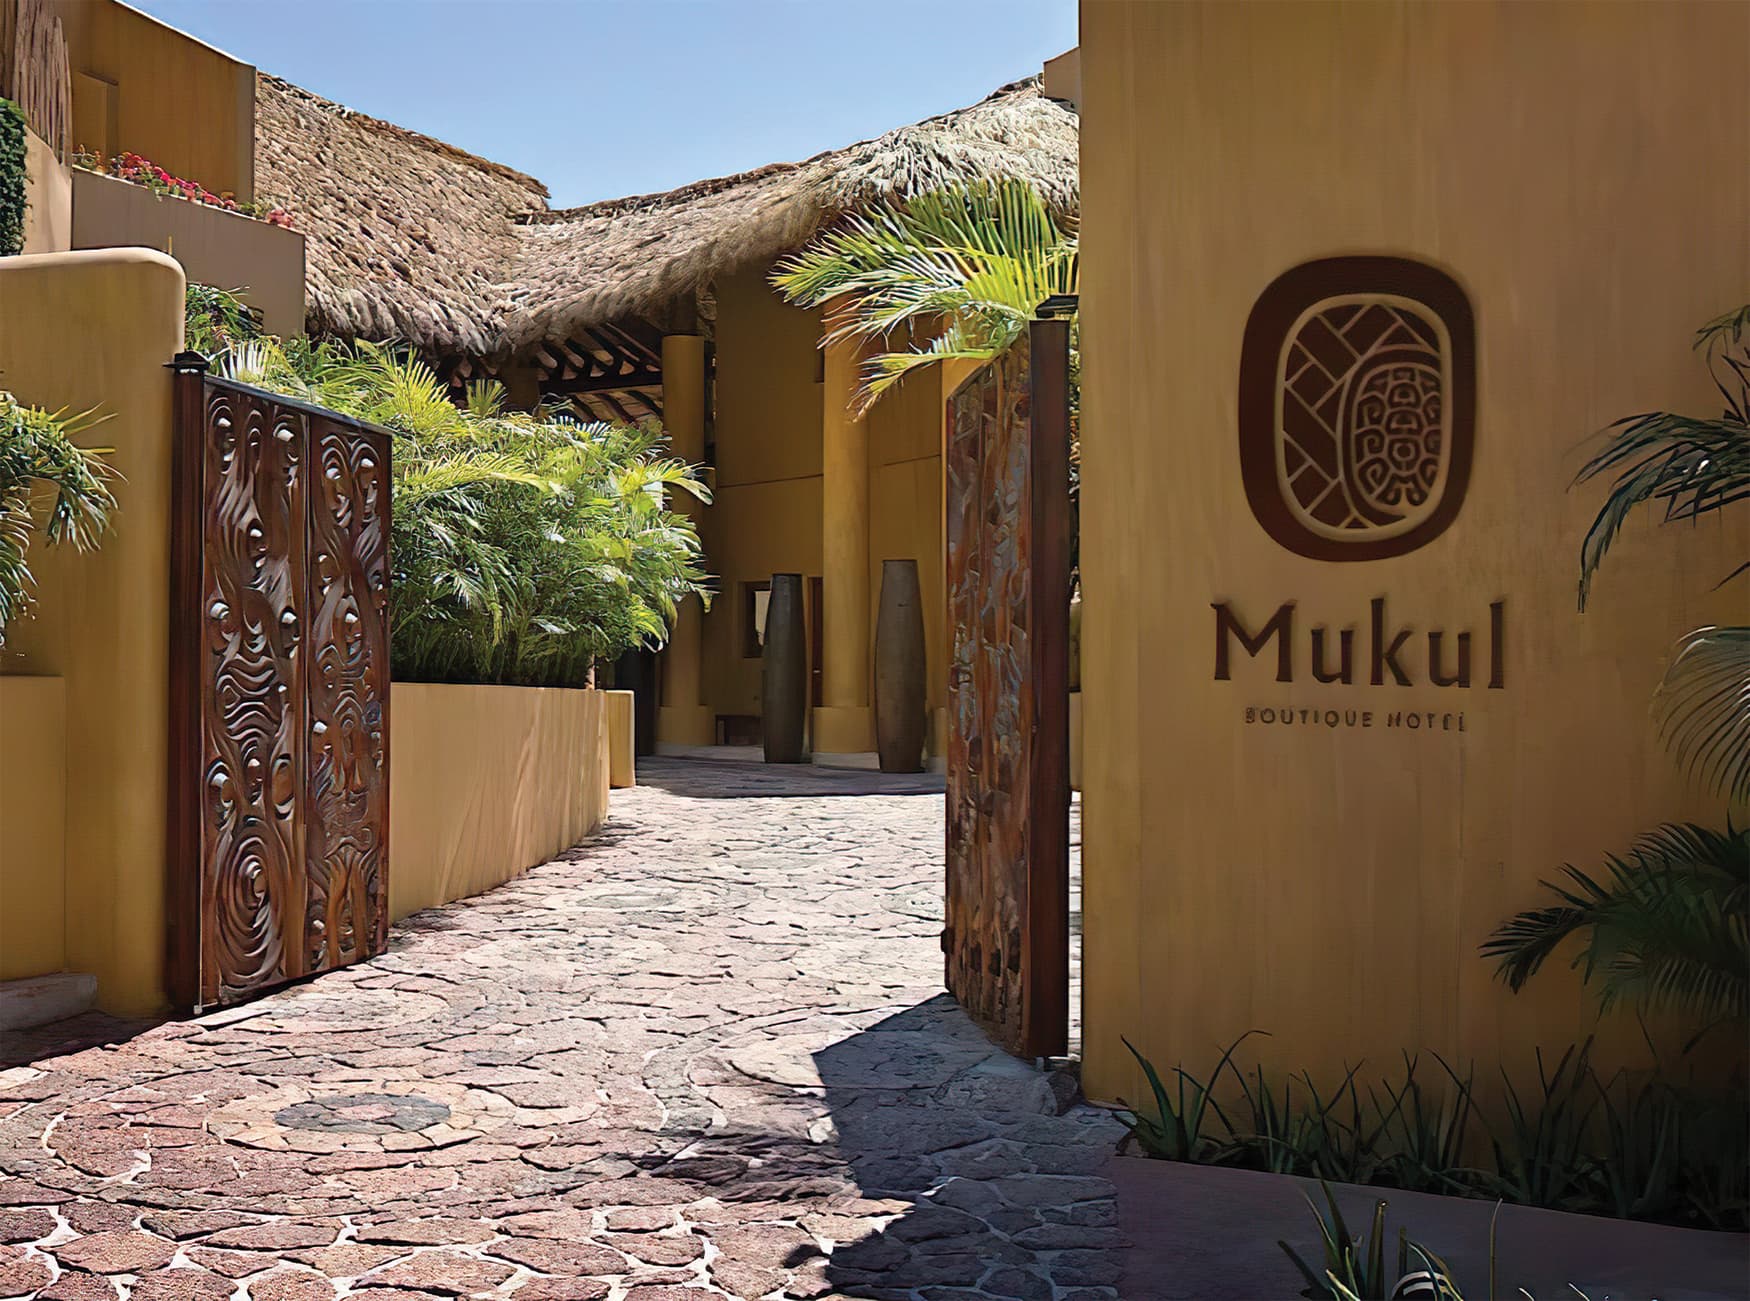 Mukul, a resort in Nicaragua, hired RSM Design to develop their Branding & Logo Design. Hospitality Signage Identity.